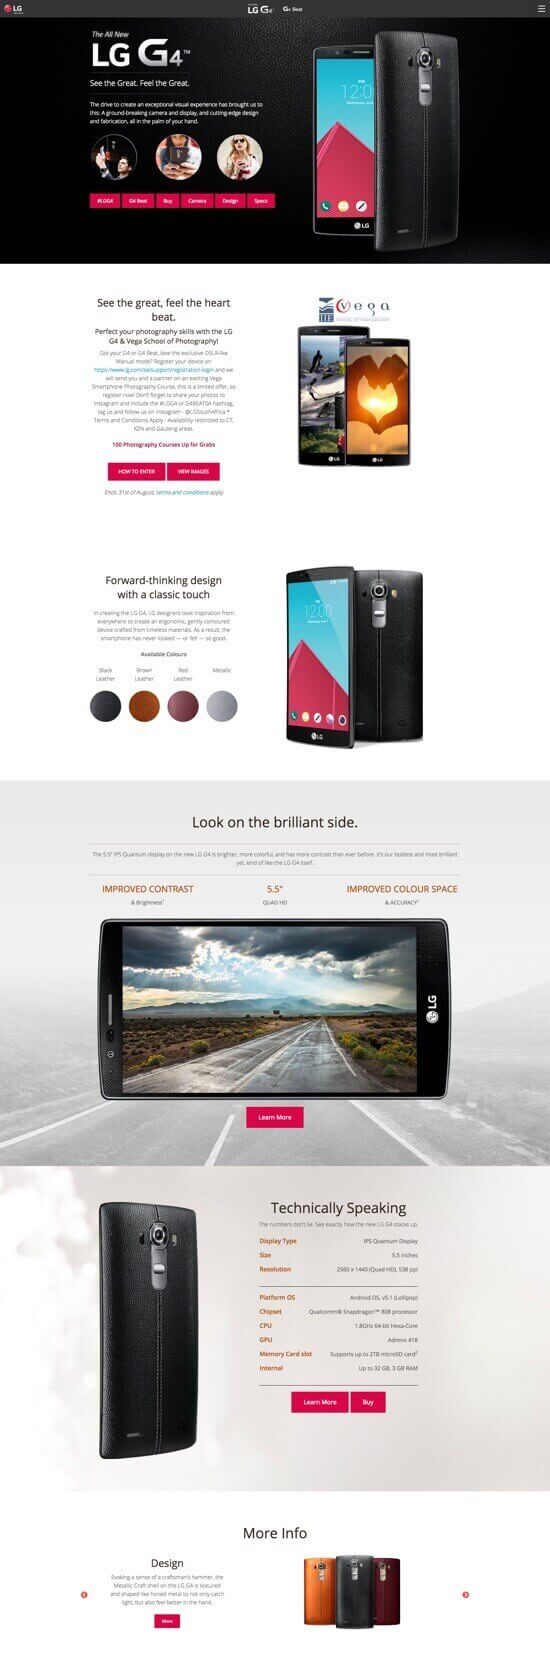 LG G4 Micro-site by Billow